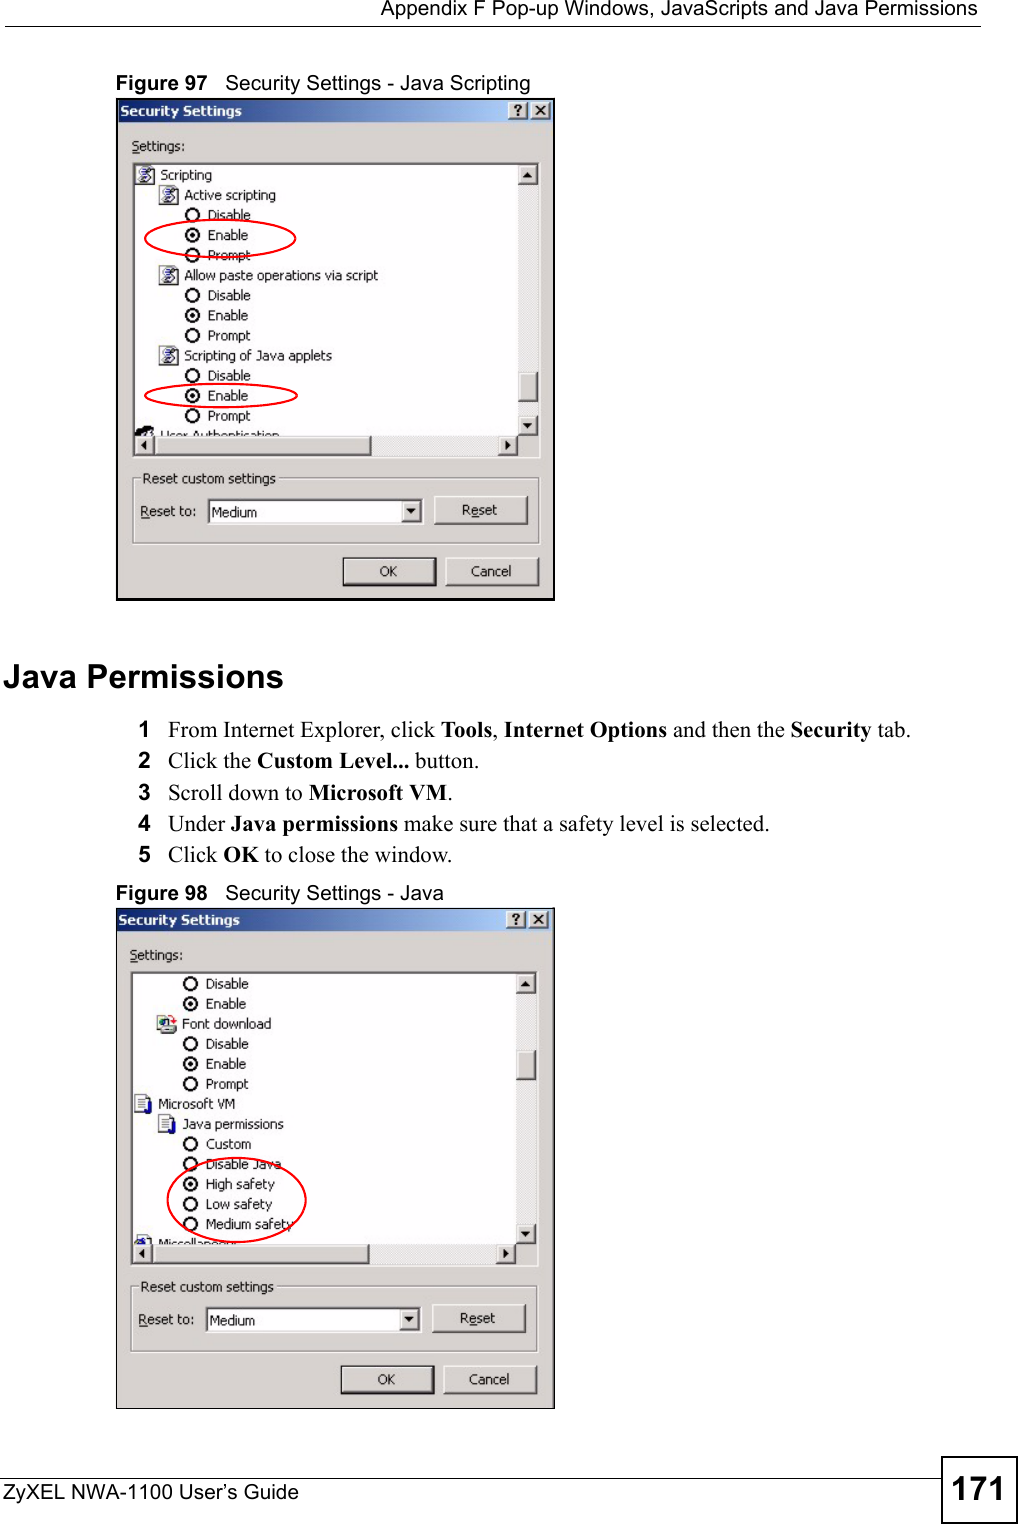  Appendix F Pop-up Windows, JavaScripts and Java PermissionsZyXEL NWA-1100 User’s Guide 171Figure 97   Security Settings - Java ScriptingJava Permissions1From Internet Explorer, click Tools, Internet Options and then the Security tab. 2Click the Custom Level... button. 3Scroll down to Microsoft VM. 4Under Java permissions make sure that a safety level is selected.5Click OK to close the window.Figure 98   Security Settings - Java 